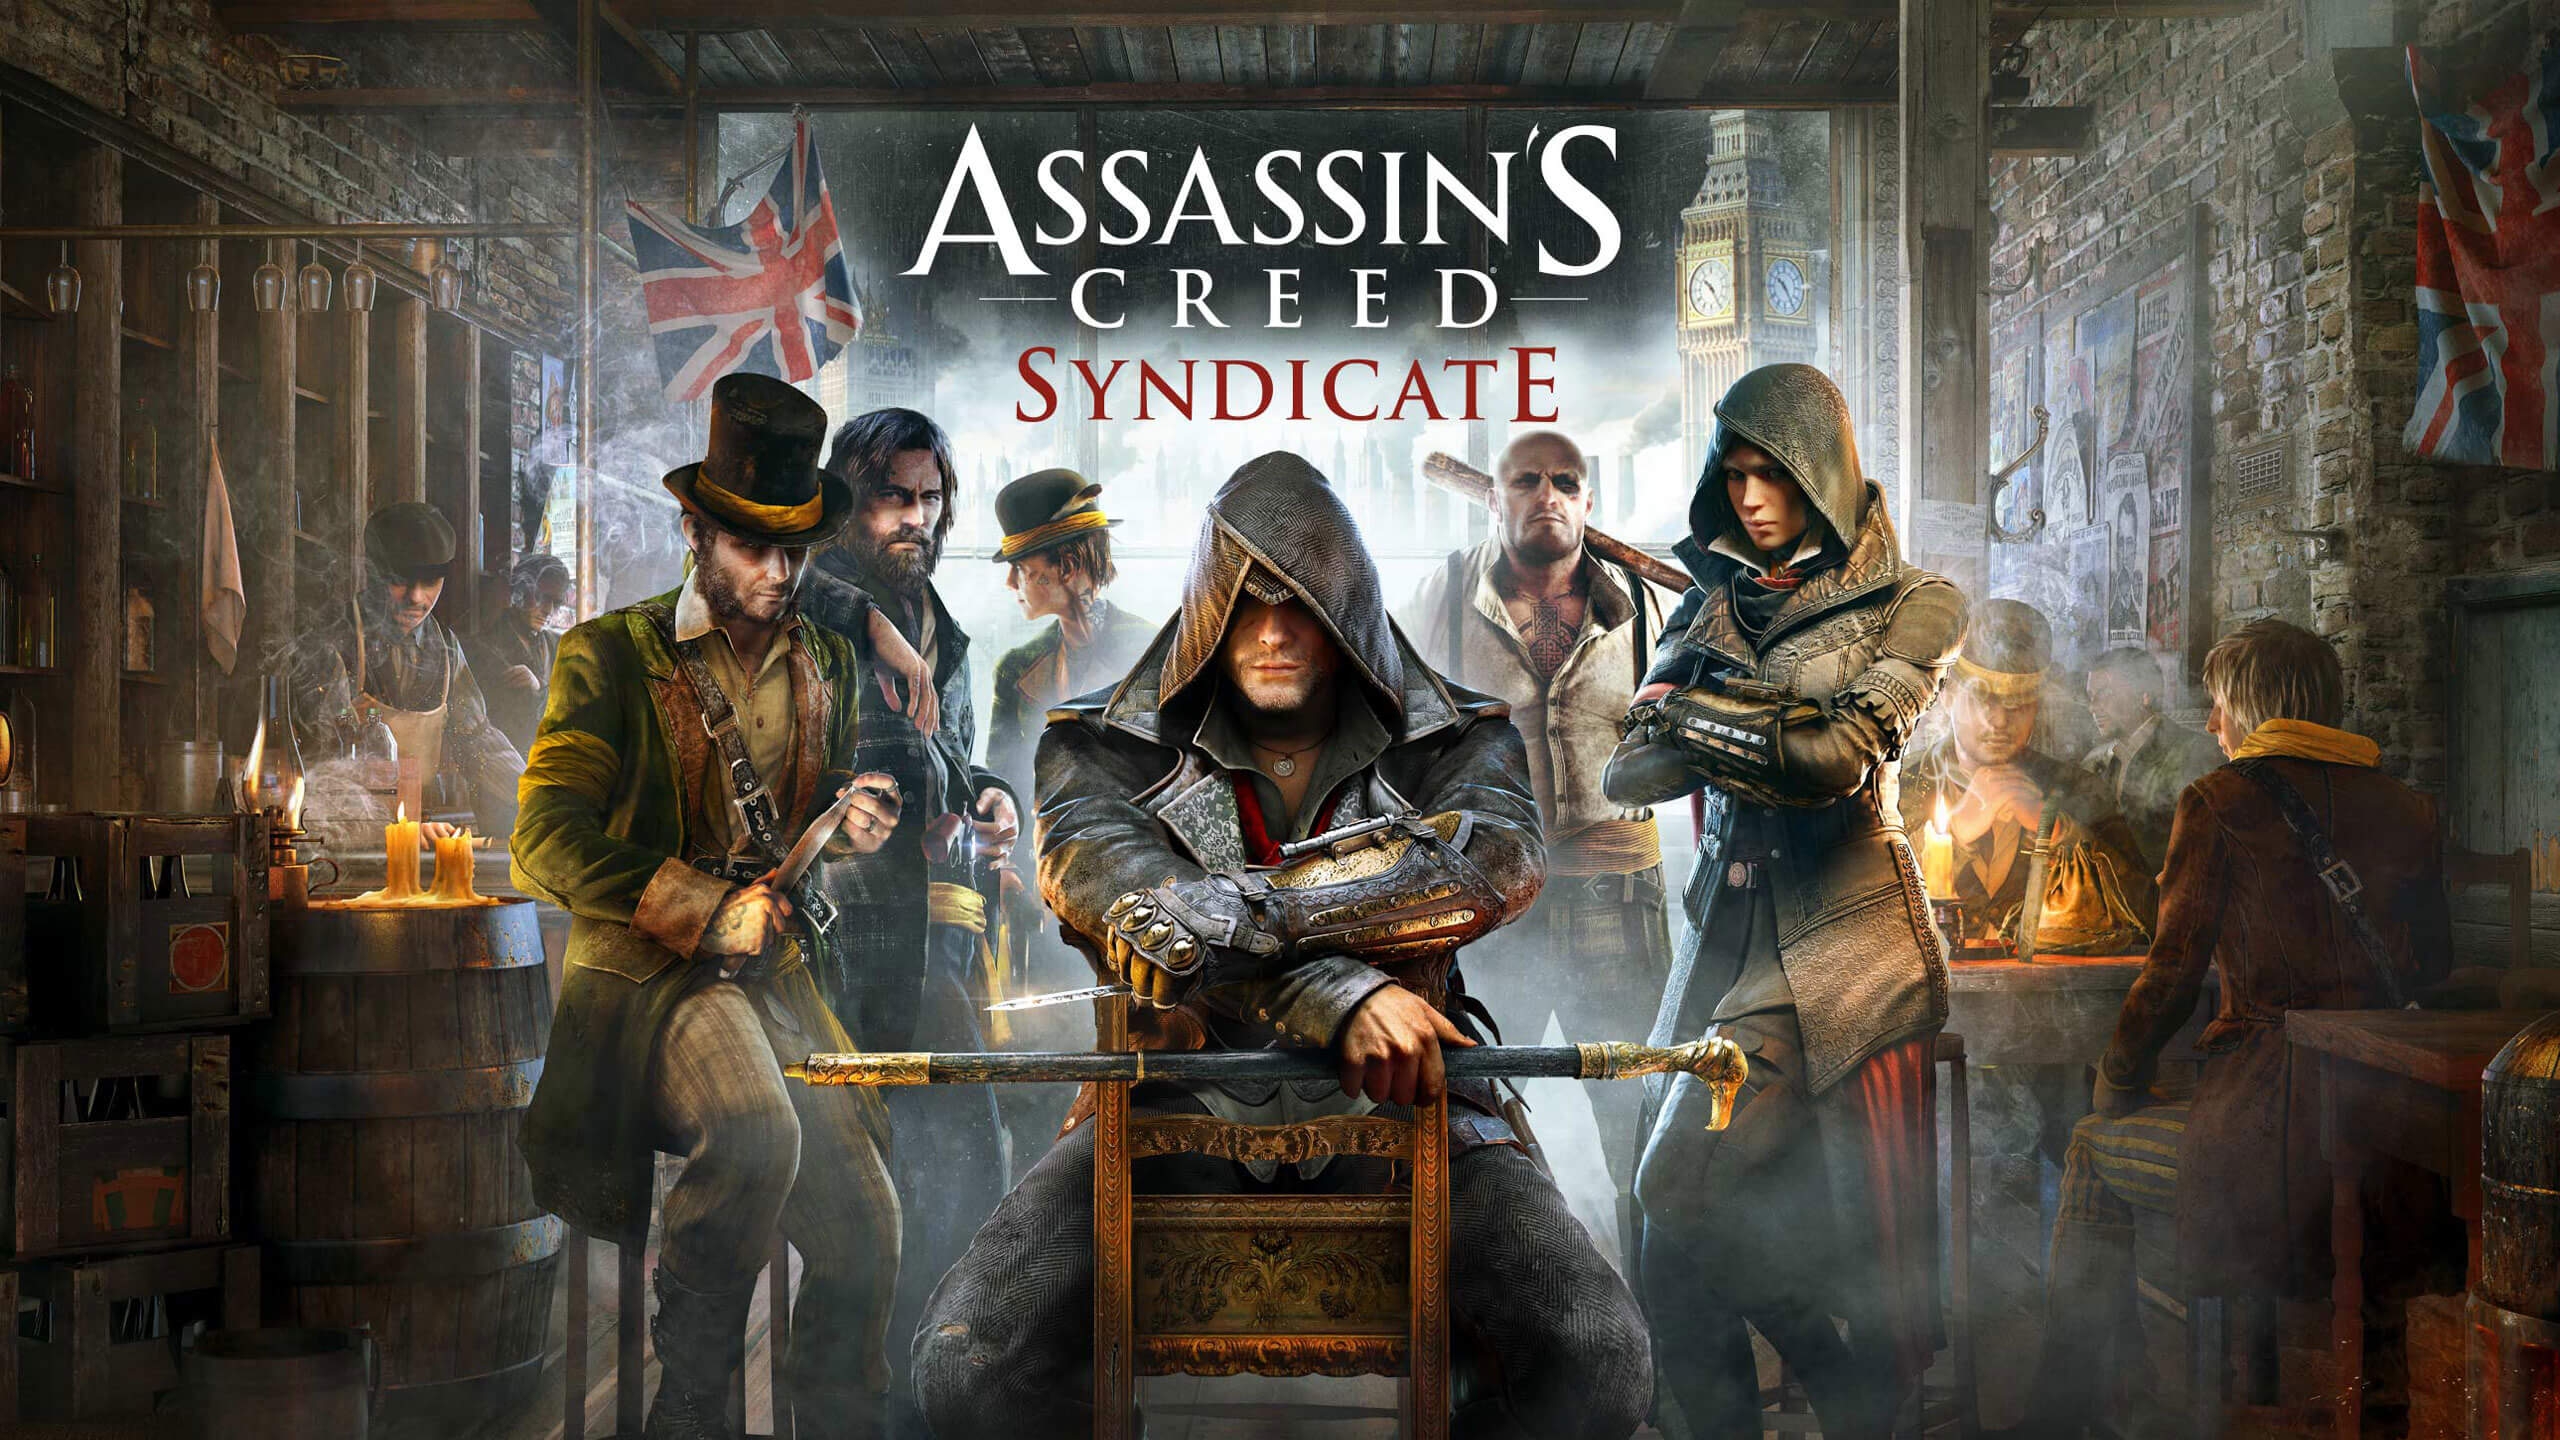  Assassin's Creed Syndicate (PS4) : Video Games